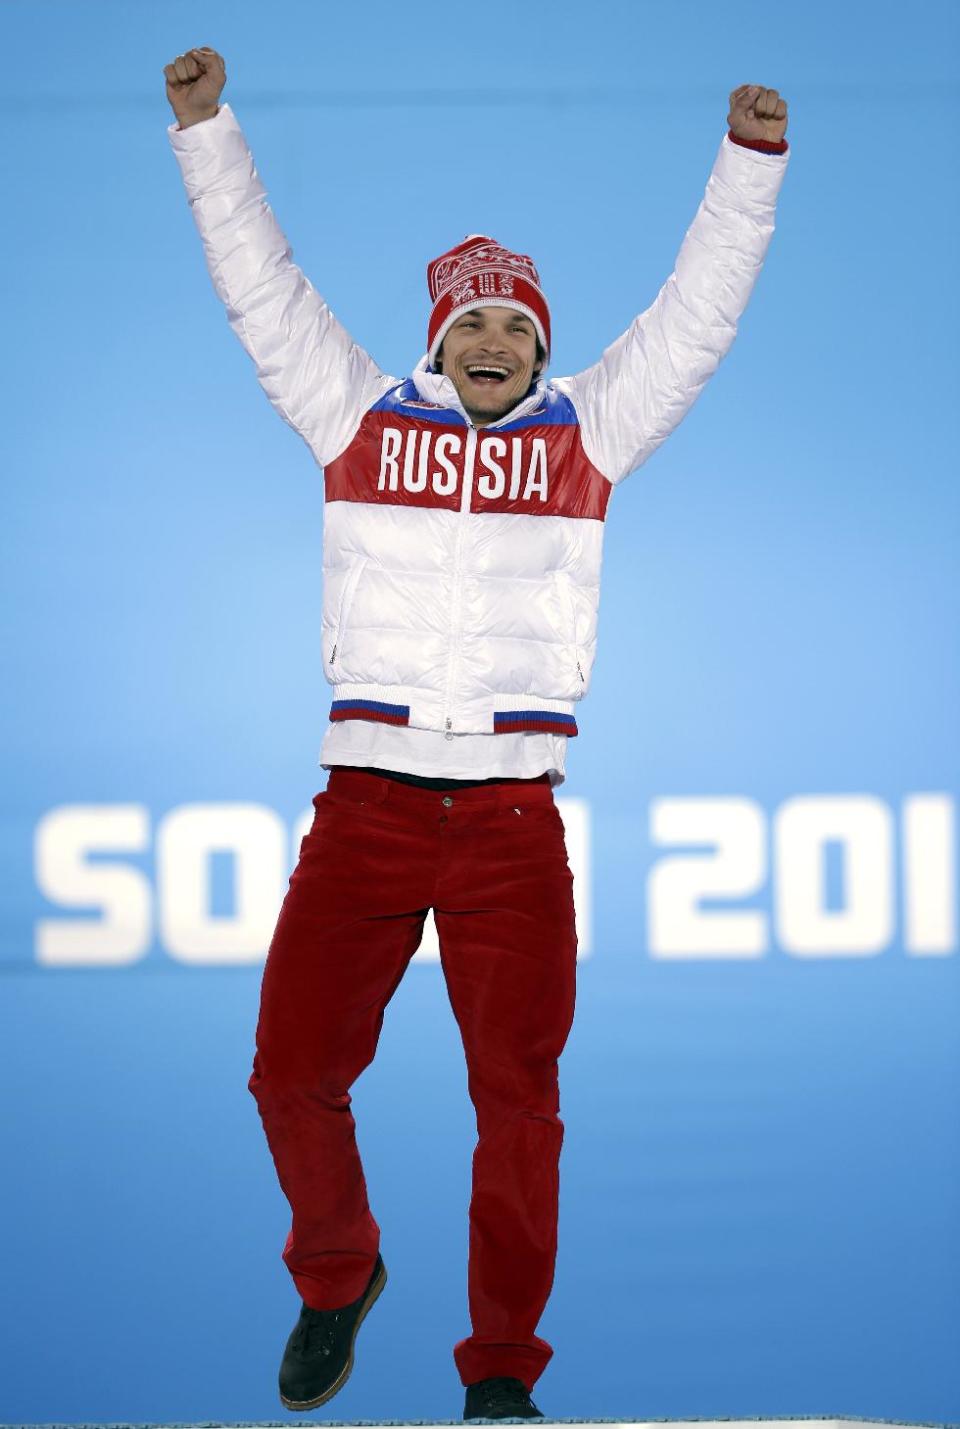 Vic Wild of Russia, the gold medalist in the men's snowboard parallel giant slalom, celebrates during the medals ceremony at the 2014 Winter Olympics, Wednesday, Feb. 19, 2014, in Sochi, Russia. (AP Photo/David Goldman)